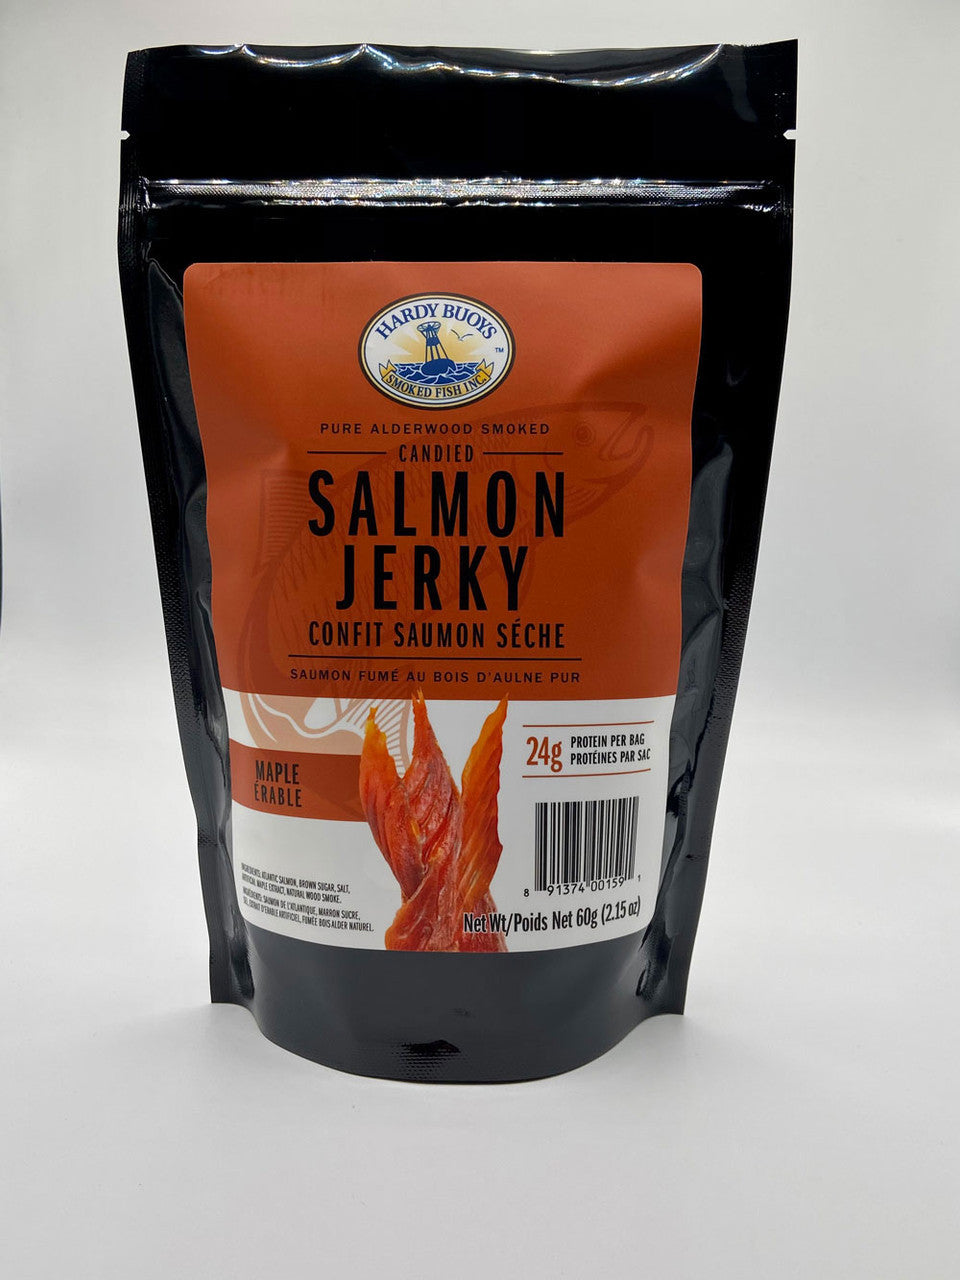 20 Pack Maple Candied Salmon-Jerky